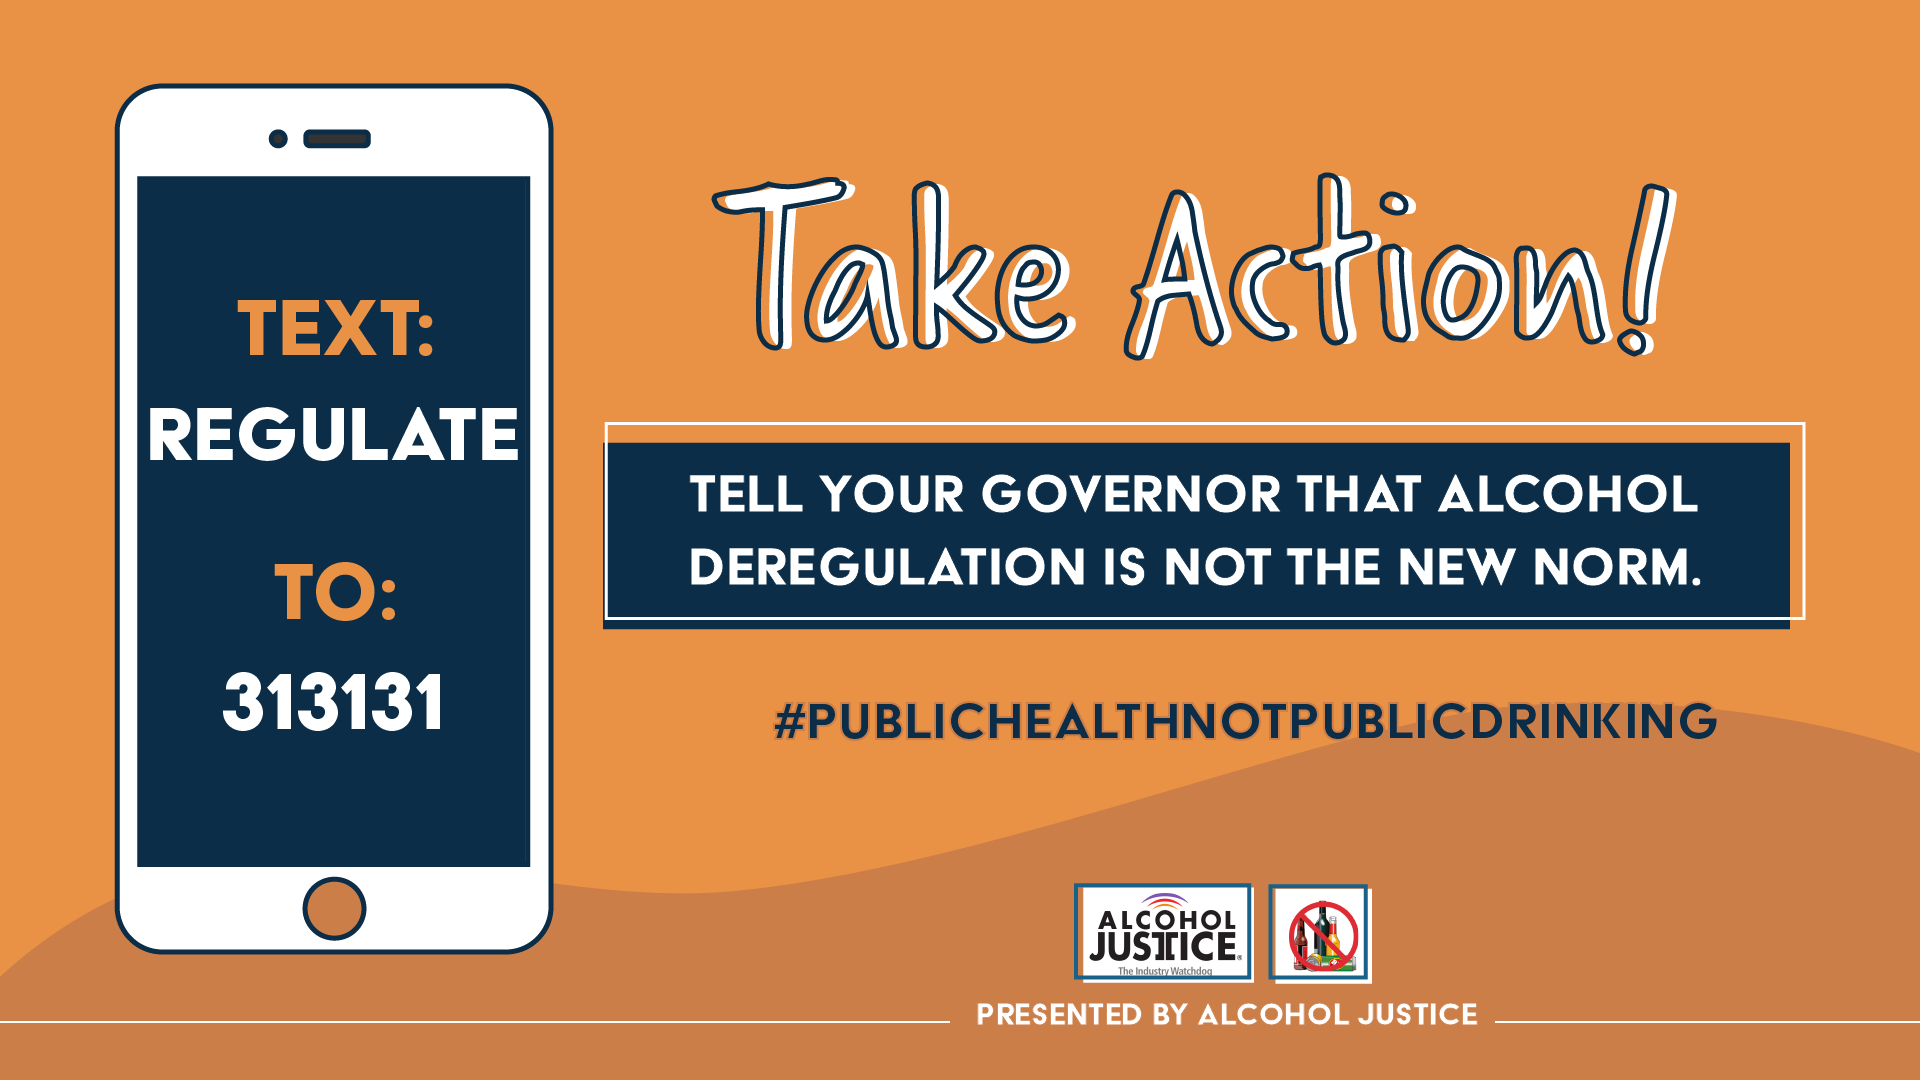 text REGULATE to 313131 to tell your governor to fight alcohol deregulation under COVID-19